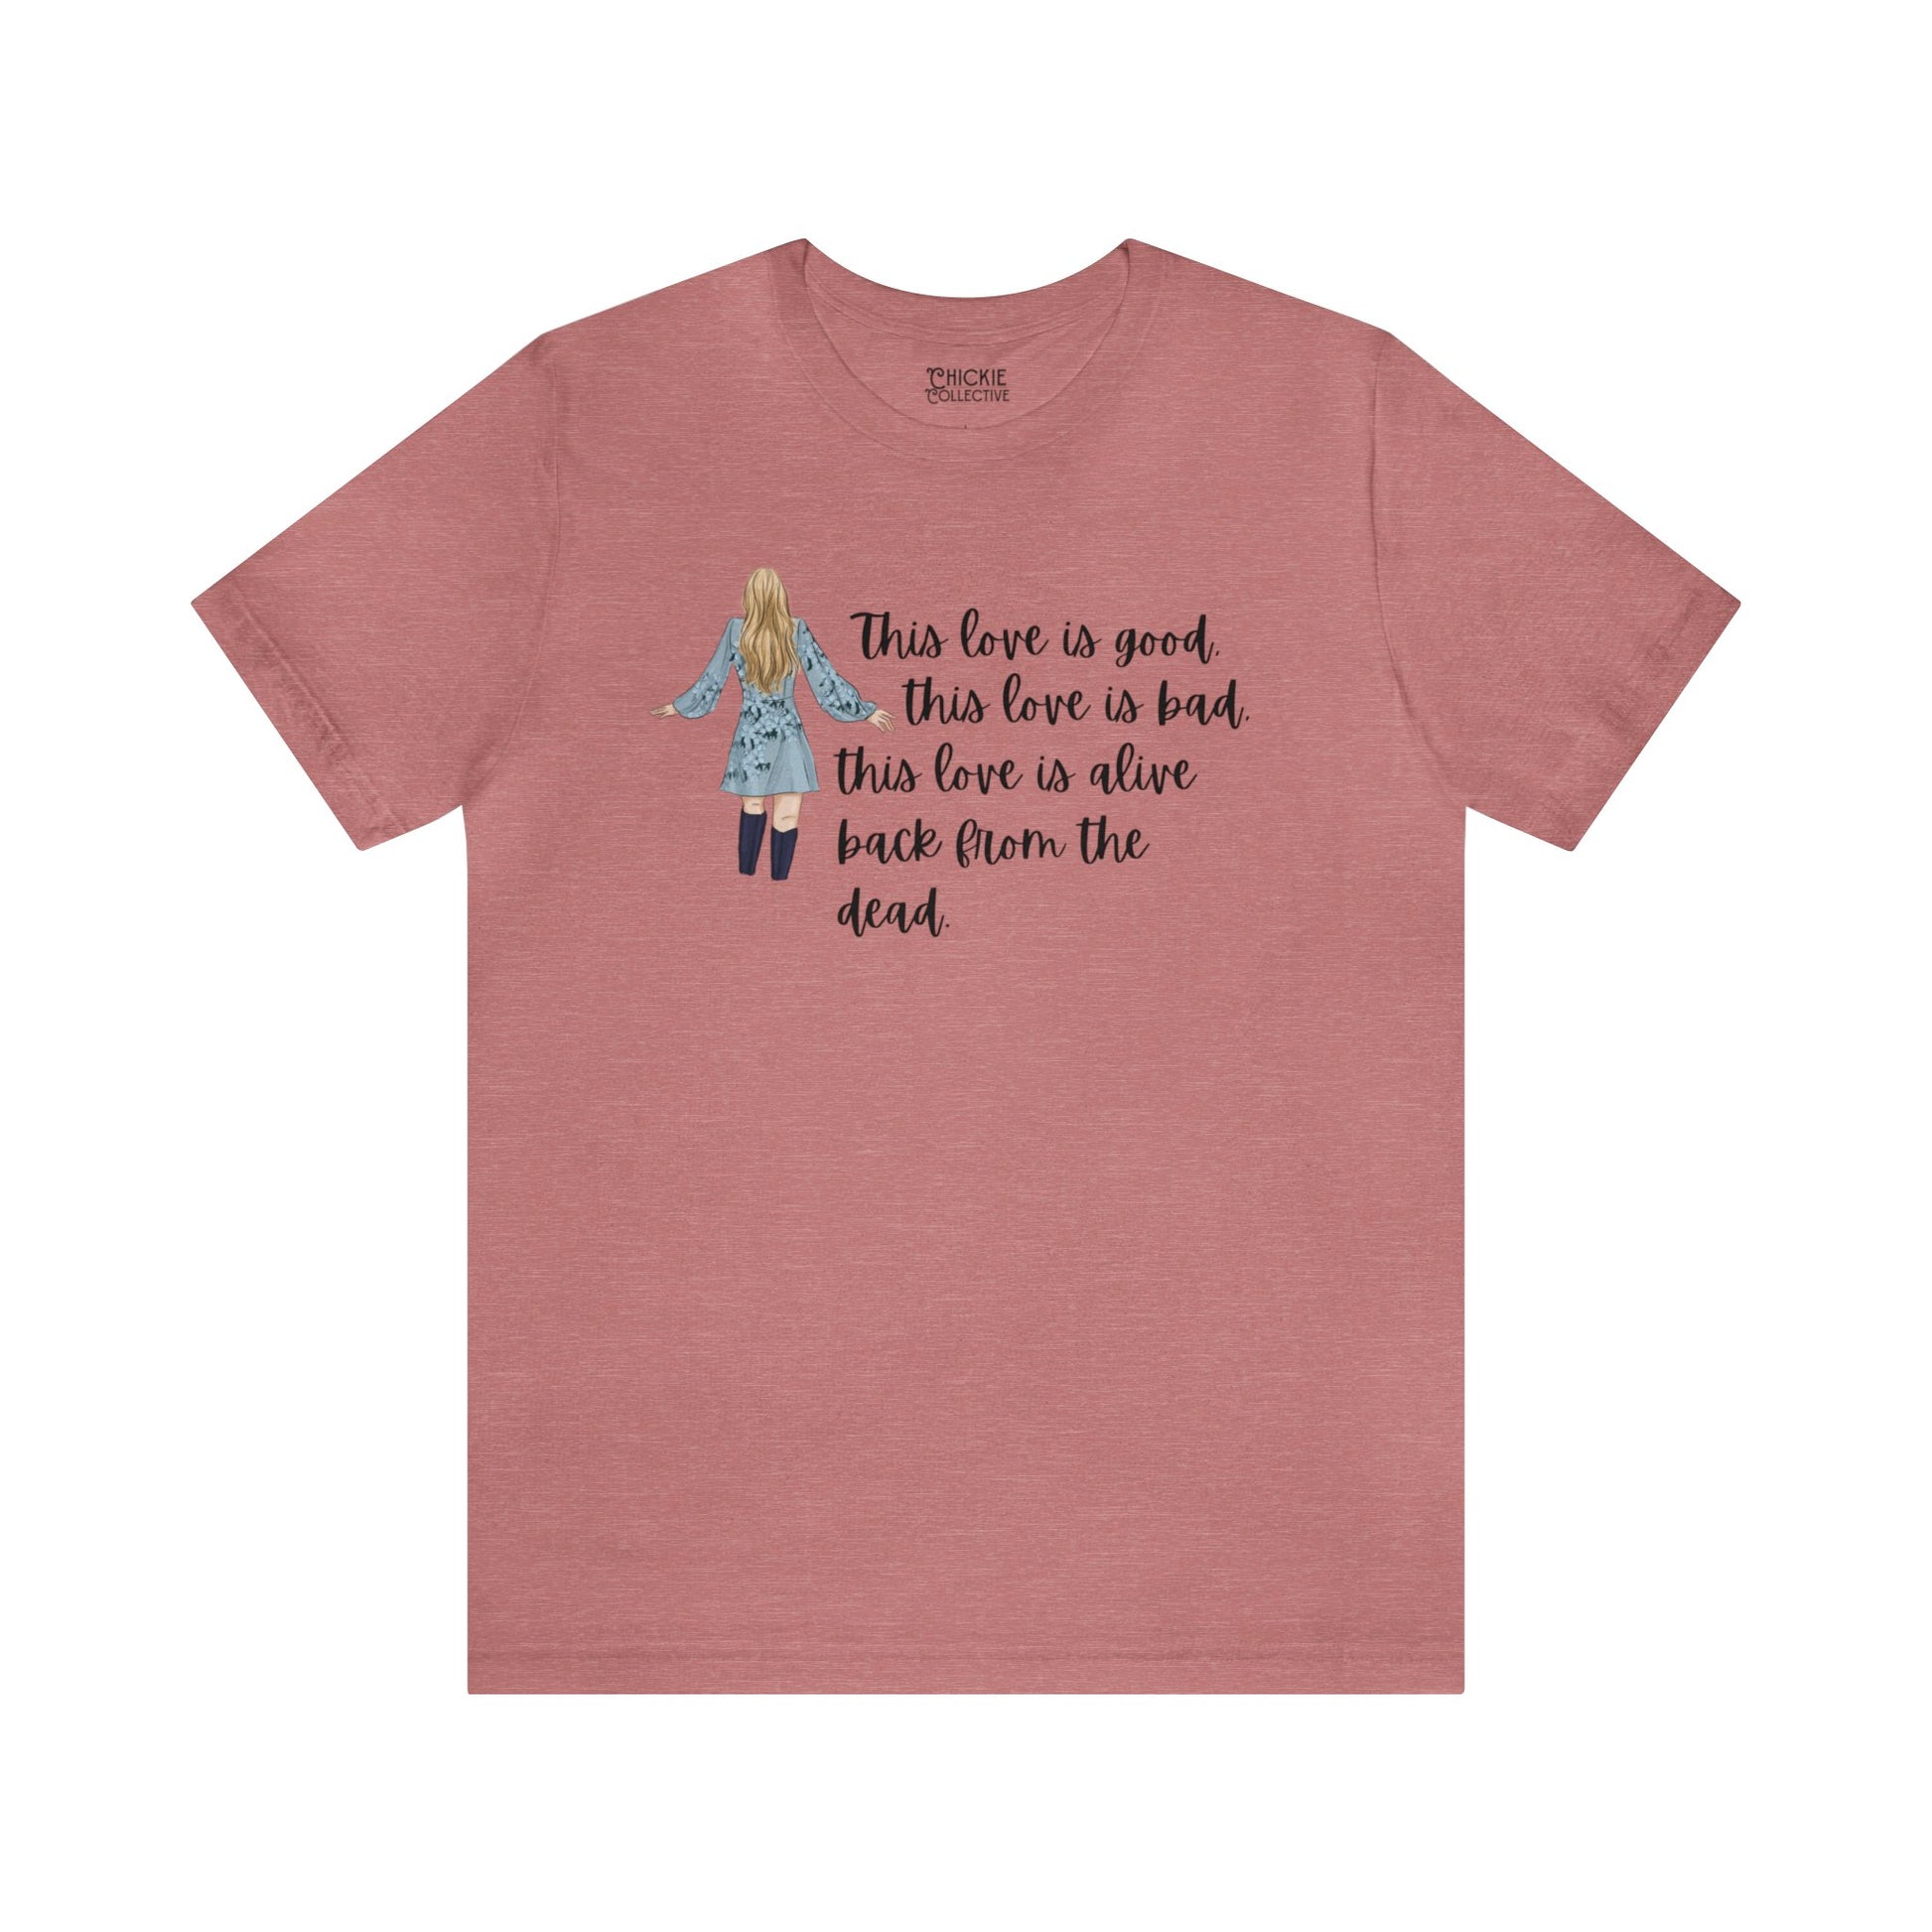 Taylor Swift Preppy Picture T-Shirt - This Love Is Good, This Love Is Bad T-Shirt Heather Mauve S  - Chickie Collective